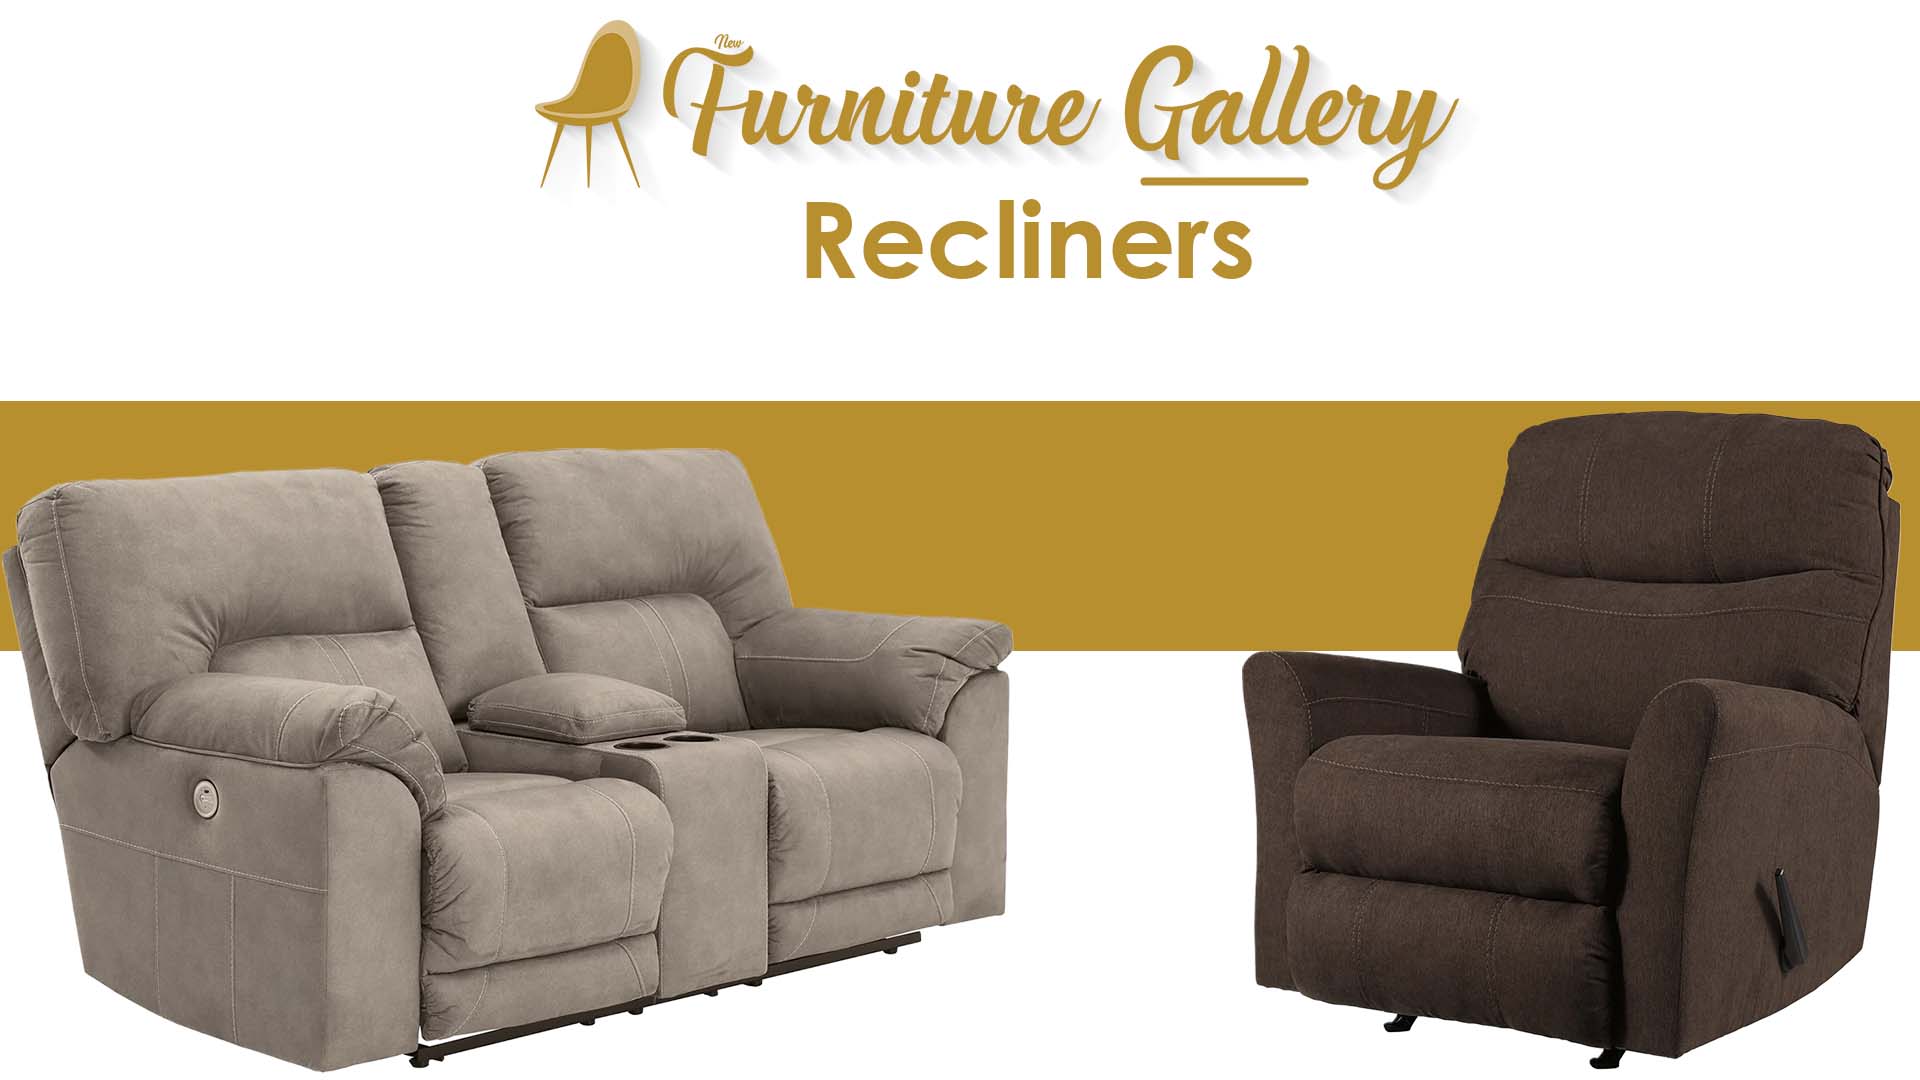 Brightening Up Your Living Space with Recliners | New Furniture Gallery